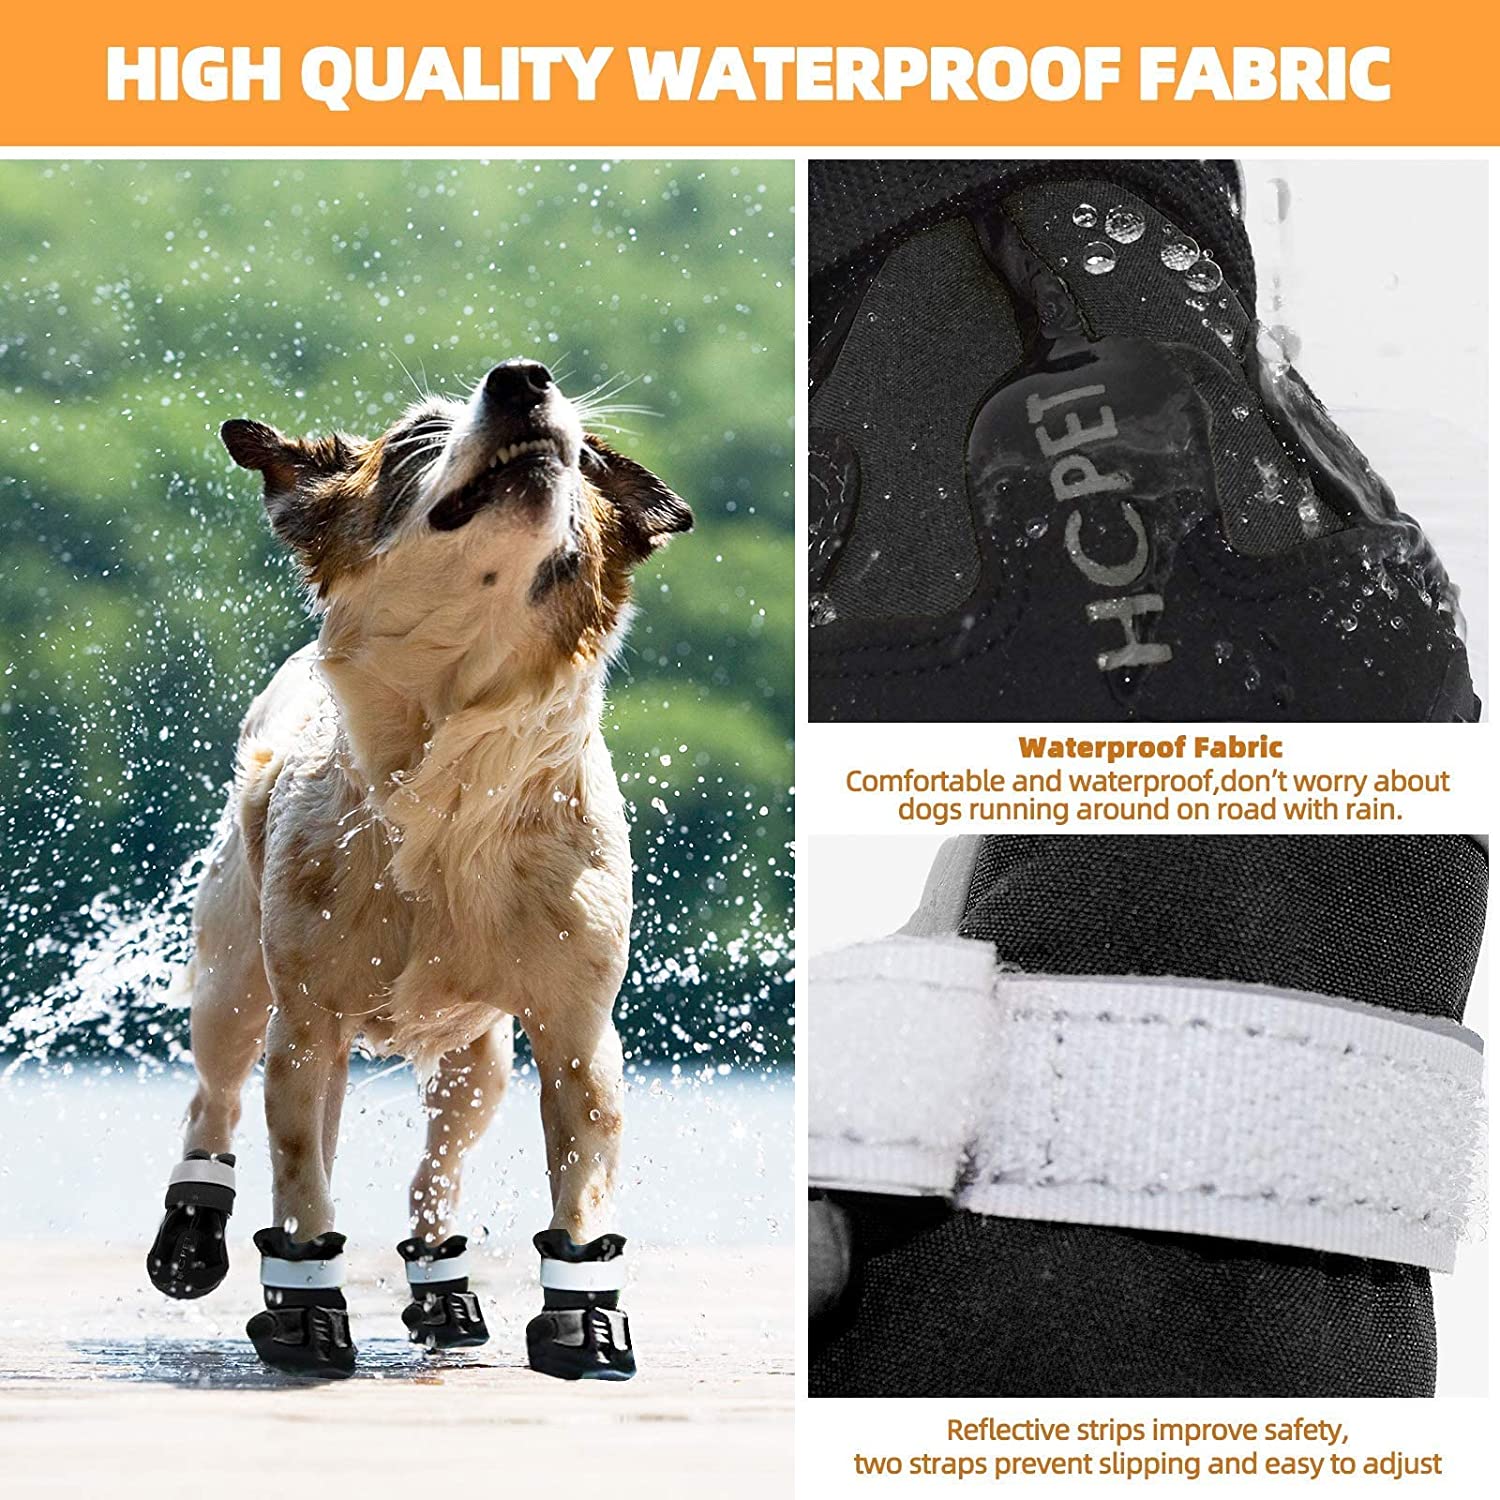 KUTKUT Dog Pack of 4pcs Boots, Waterproof Dog Shoes, Dog Booties with Reflective Rugged Anti-Slip Sole and Skid-Proof, Outdoor Dog Rain Boots for Medium to Large Dogs, Four Ways Stretch Paw P